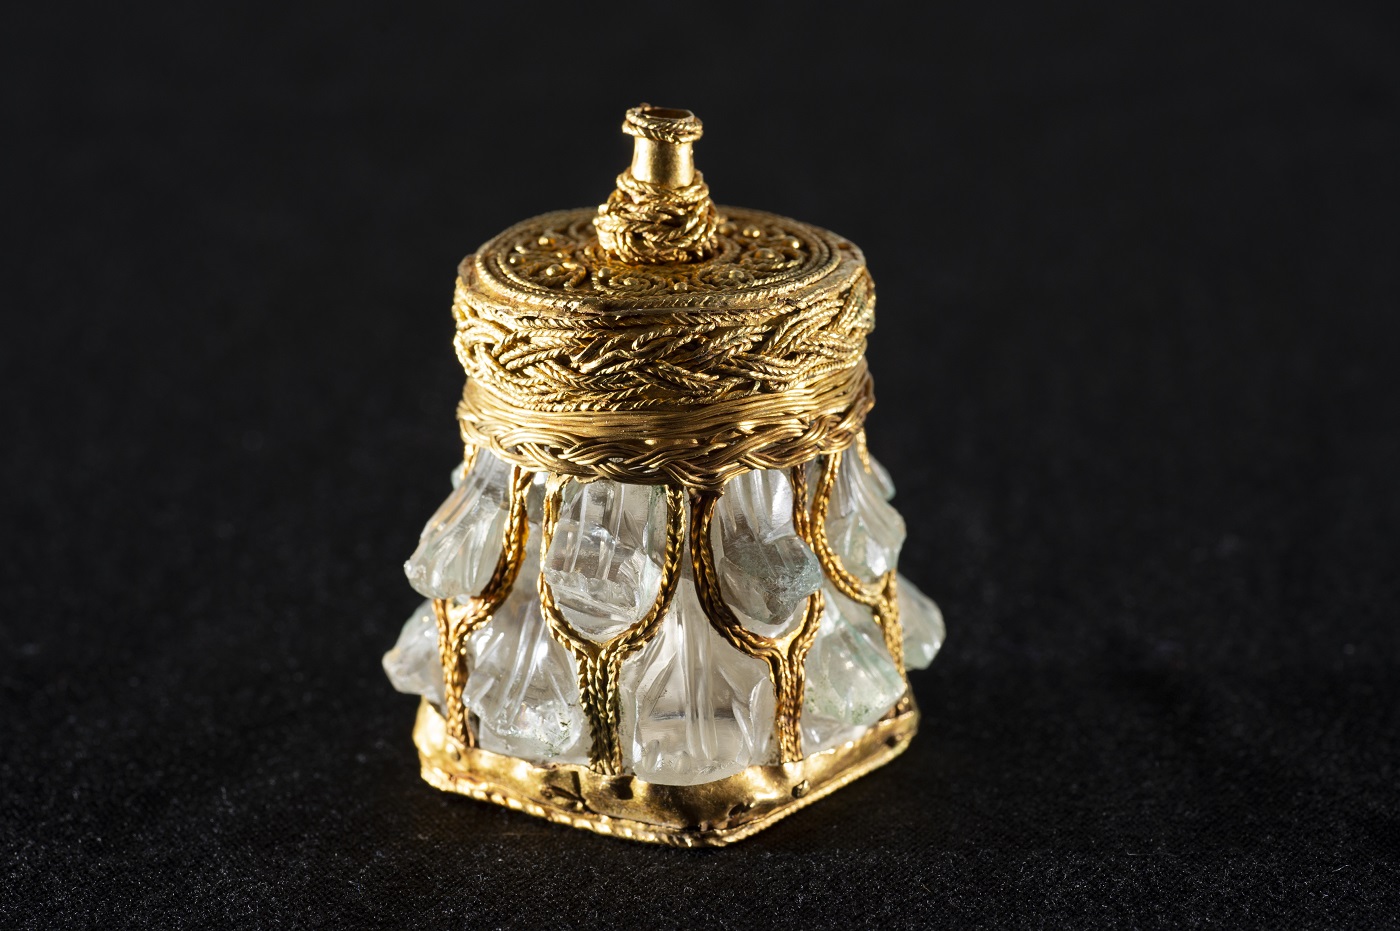 A small jar of light green crystal and shining gold stands upright against a black background.